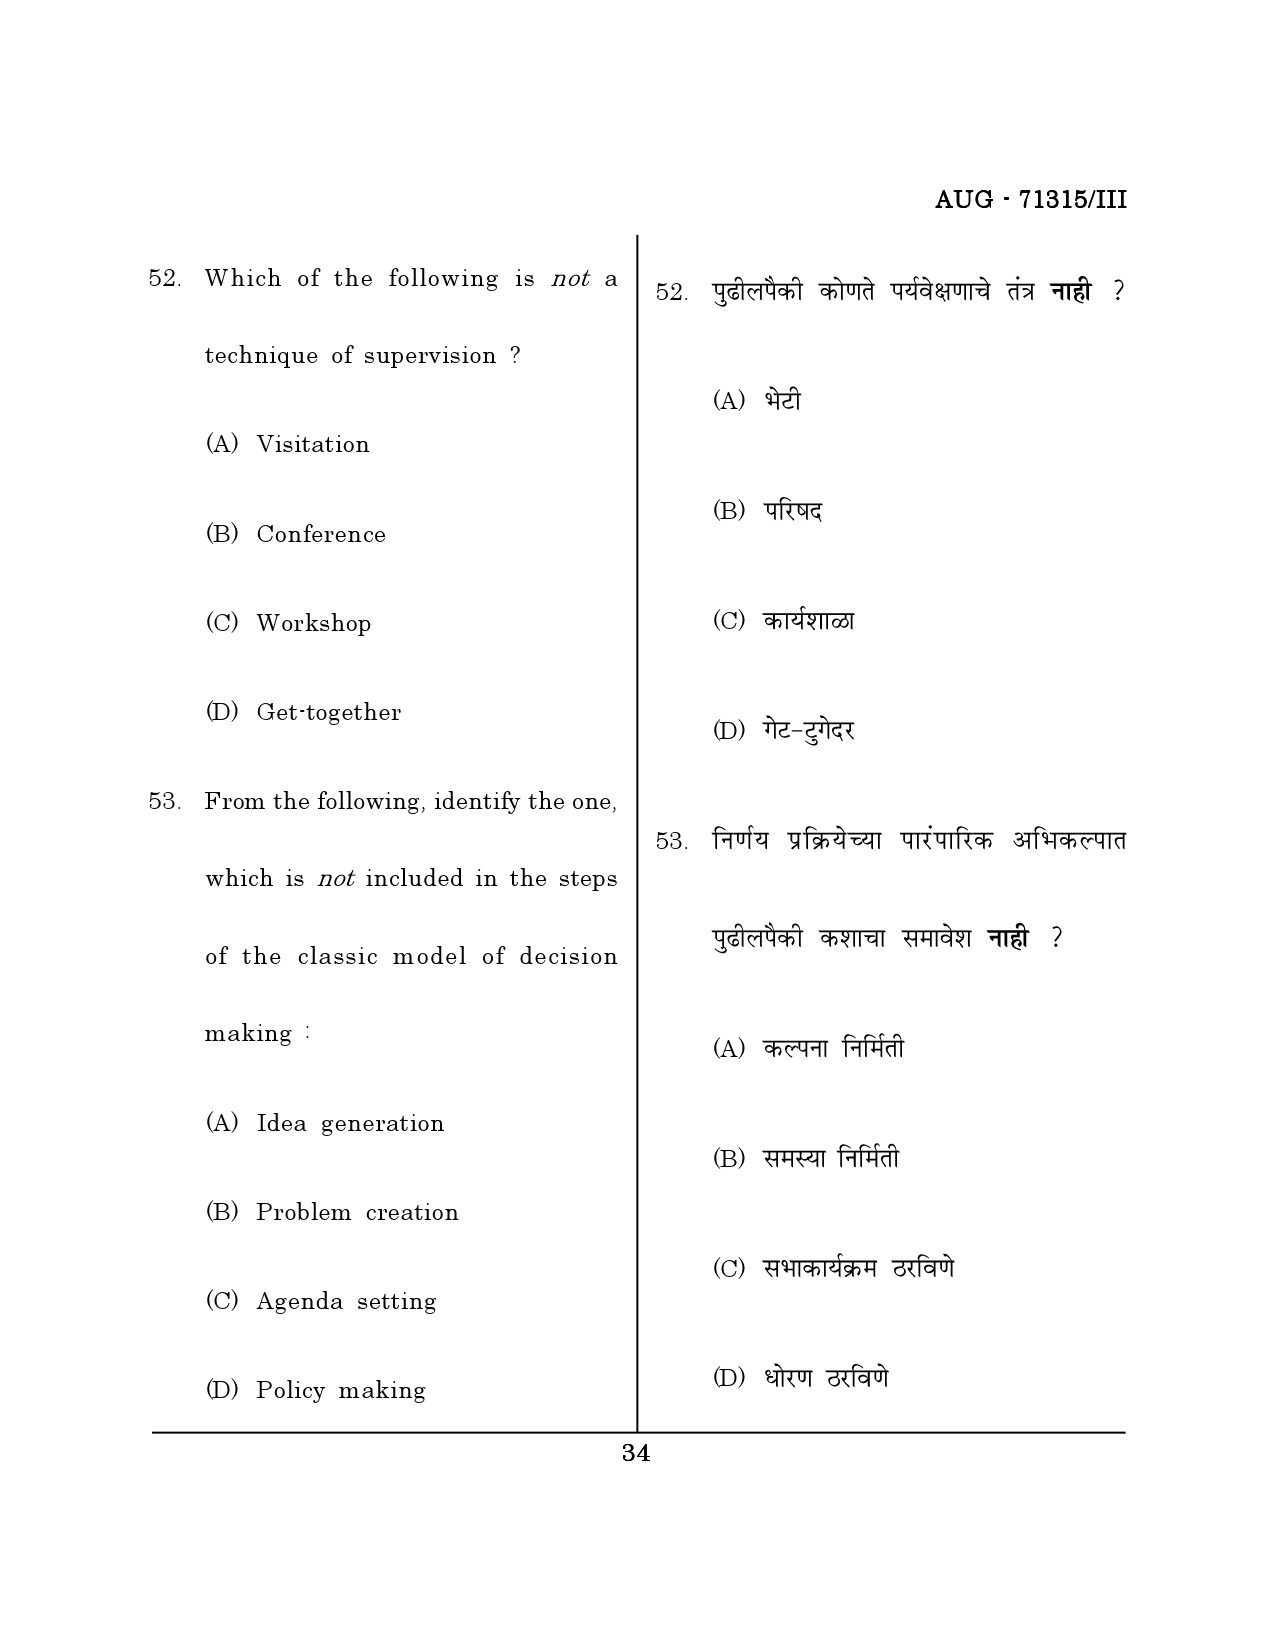 Maharashtra SET Physical Education Question Paper III August 2015 33